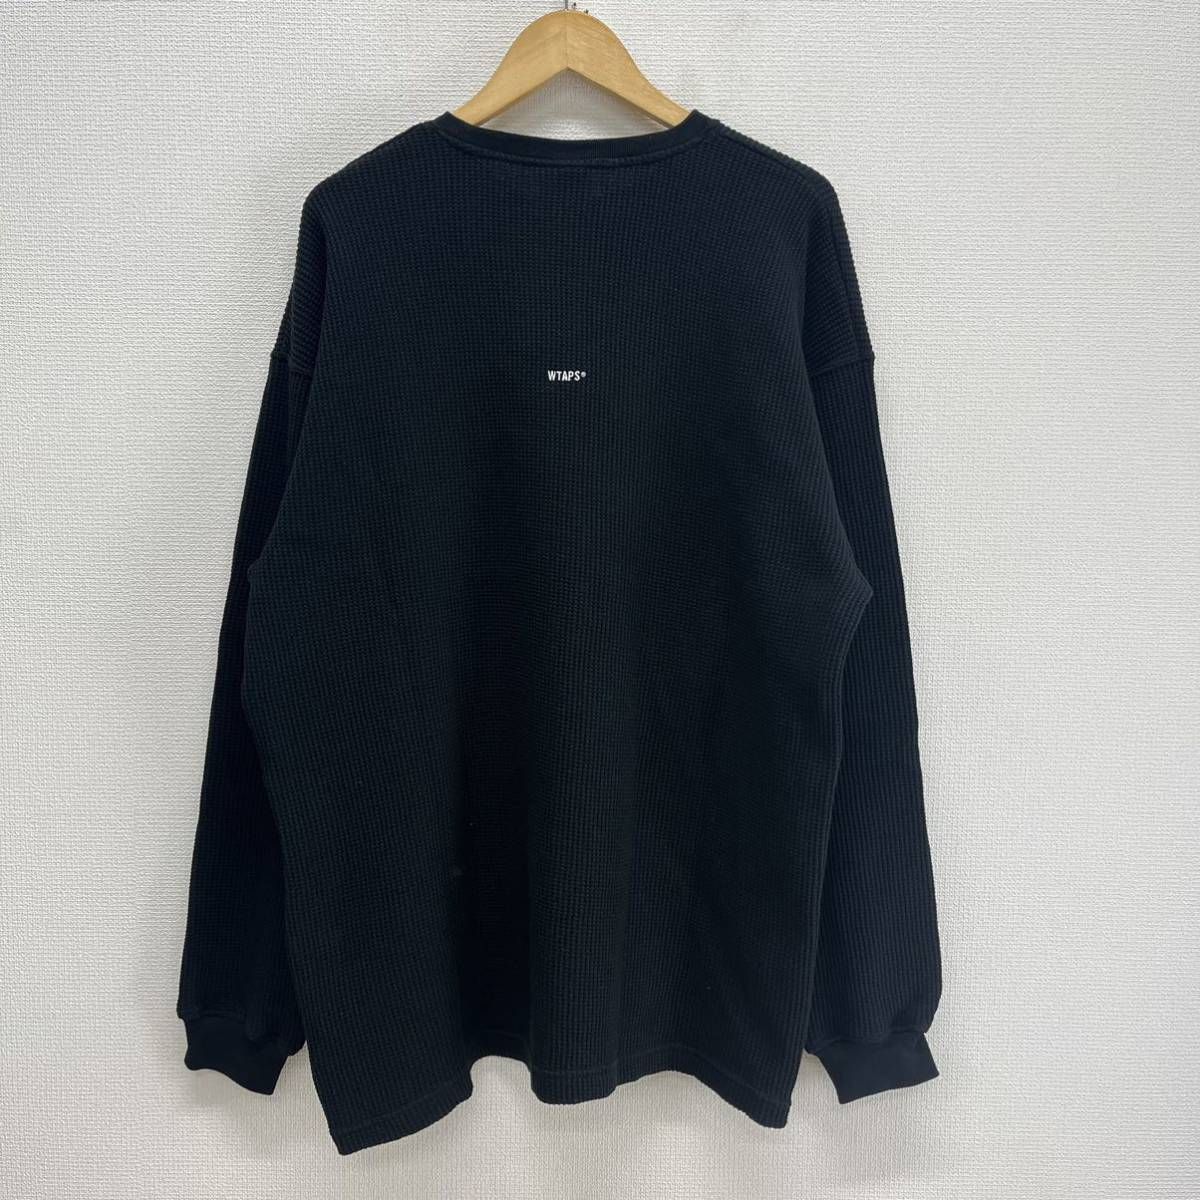 WTAPS ダブルタップス 23AW 232ATDT-CSM17 WAFFLE 01 / LS / COTTON